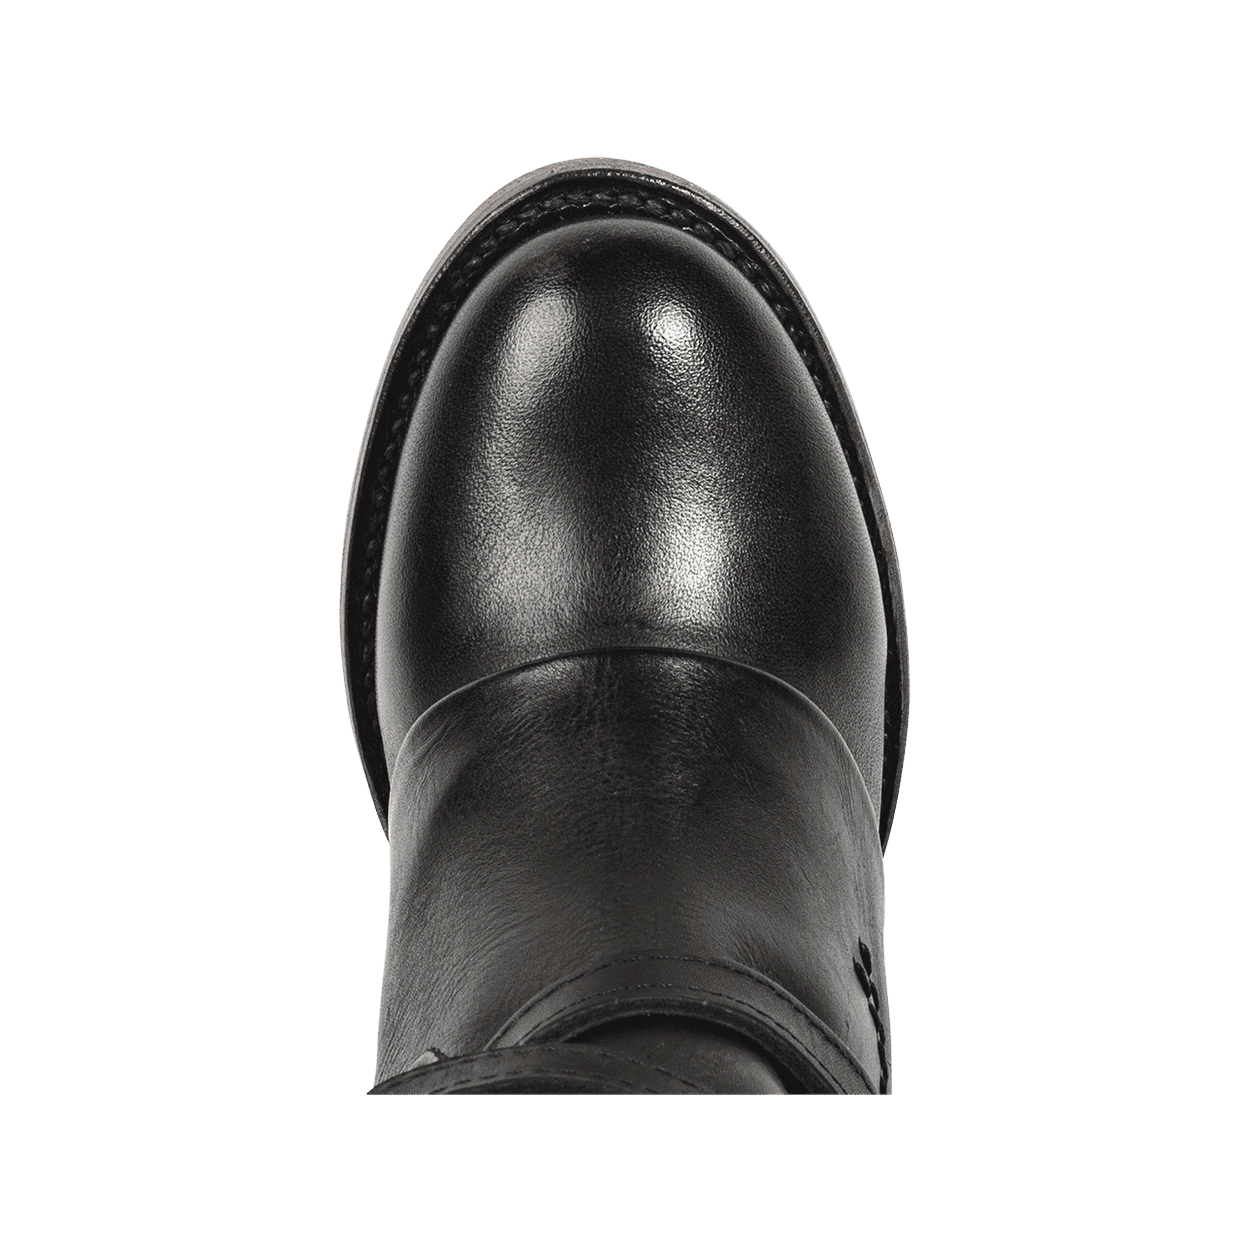 Top view showing round toe and leather ankle overlay on FREEBIRD women's Cassius black tall leather boot